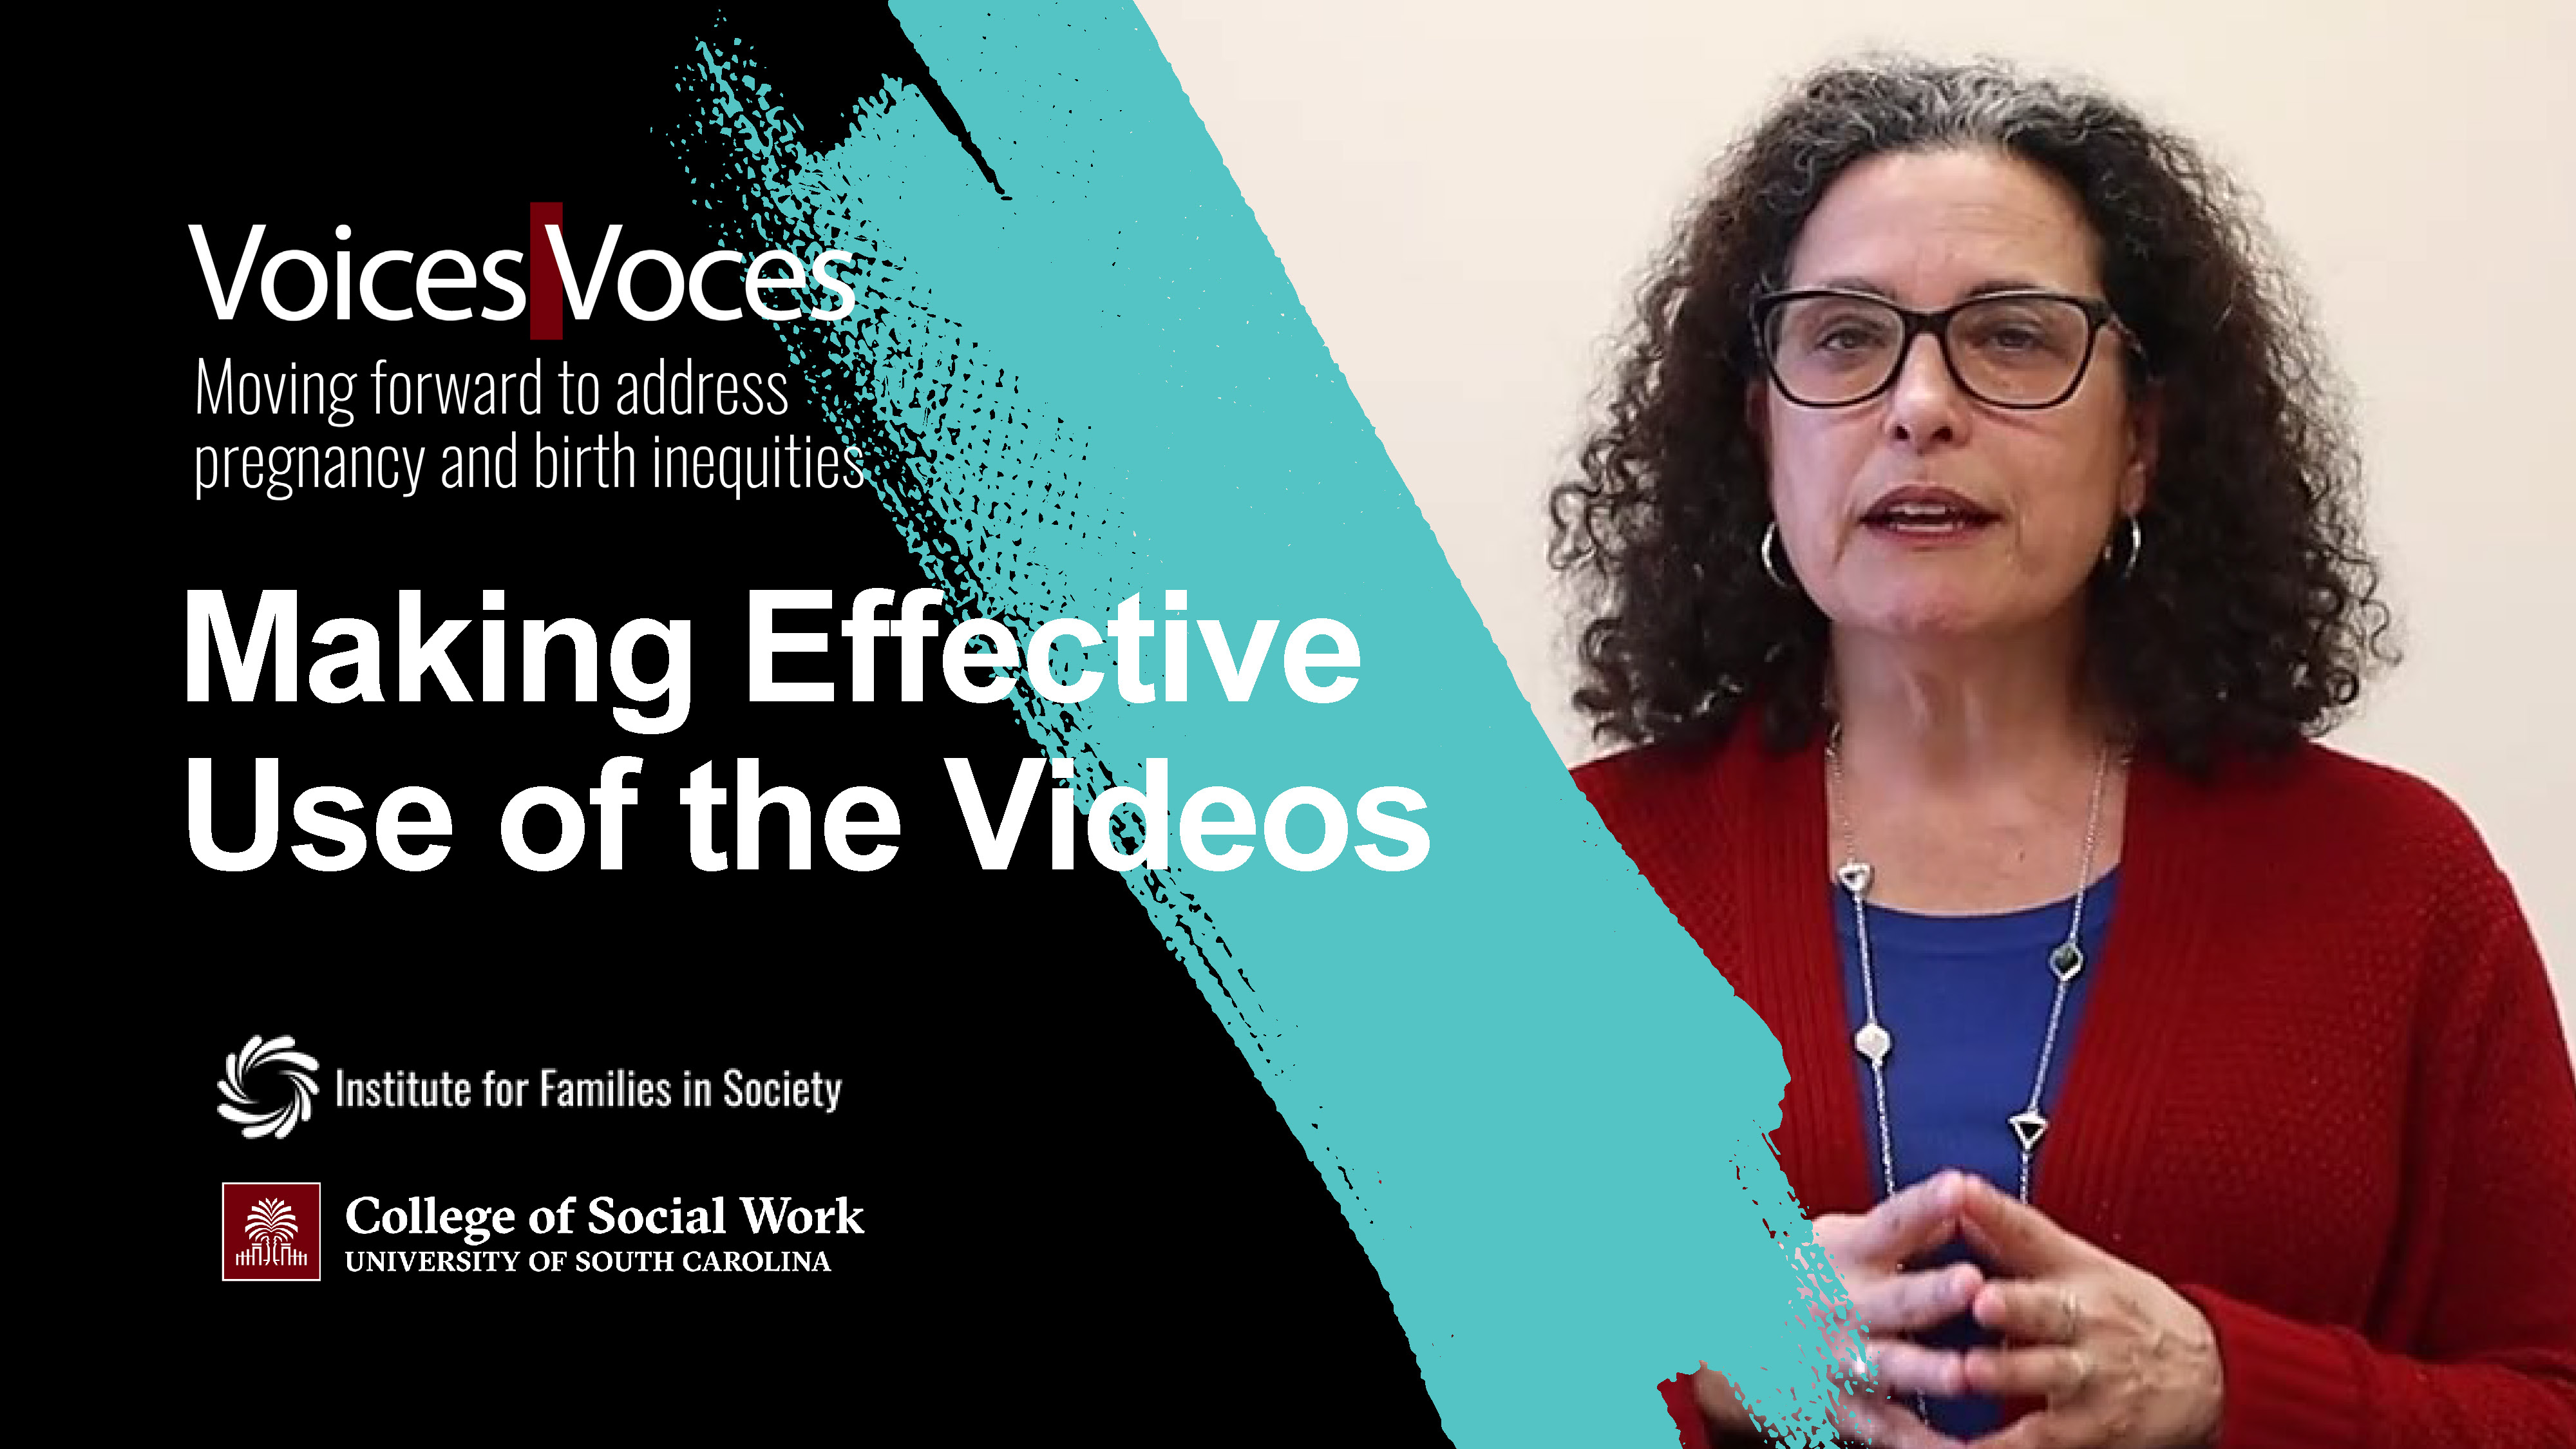 Dr. Deborah Billings gives an overview of the project, providing context for the understanding and use of the videos. Video length 5 minutes.